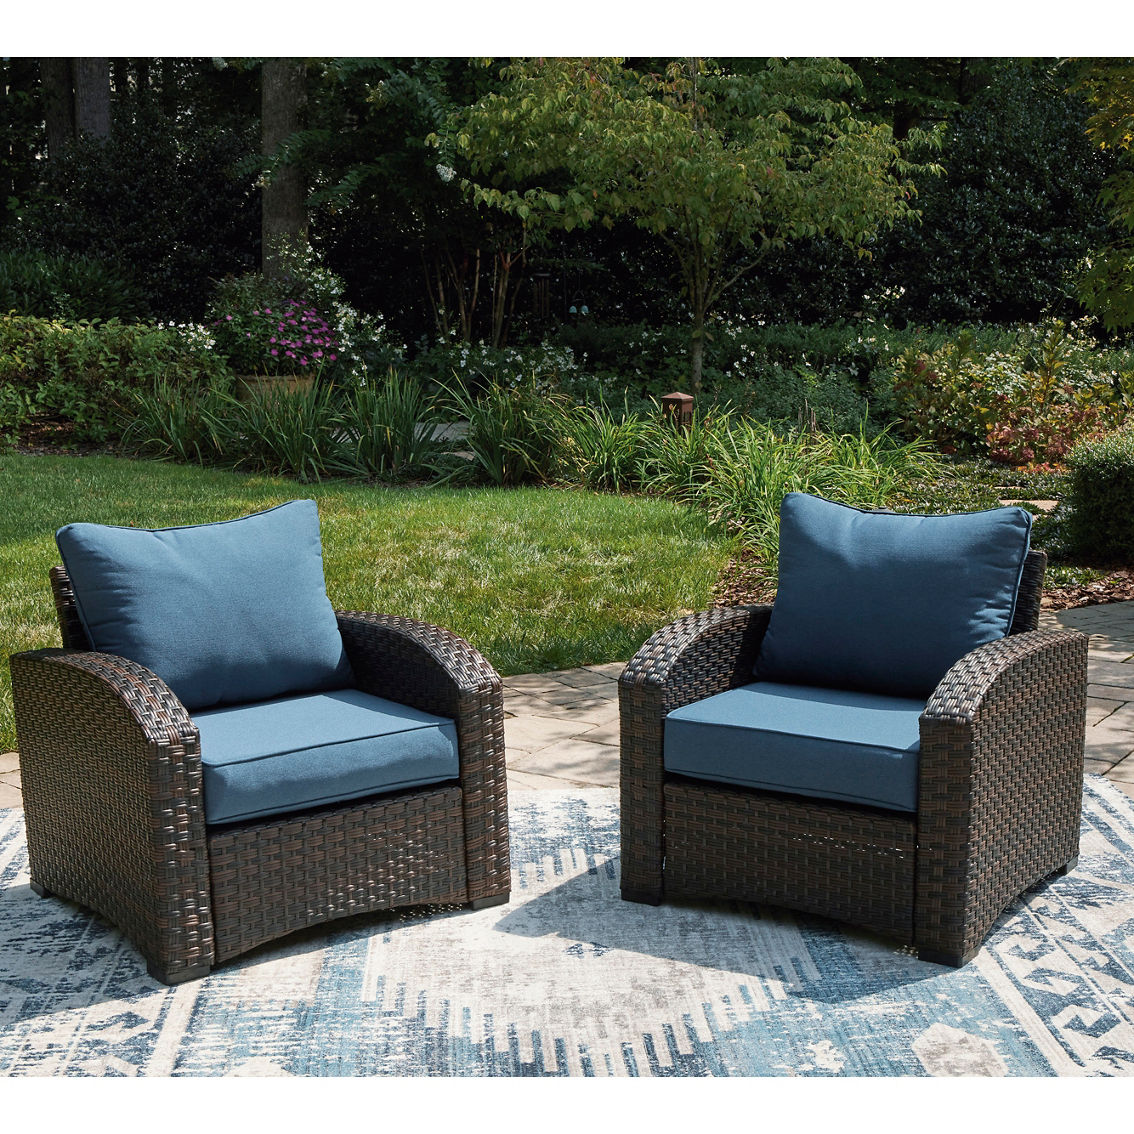 Signature Design by Ashley Windglow Outdoor Lounge Chair with Cushion - Image 2 of 3